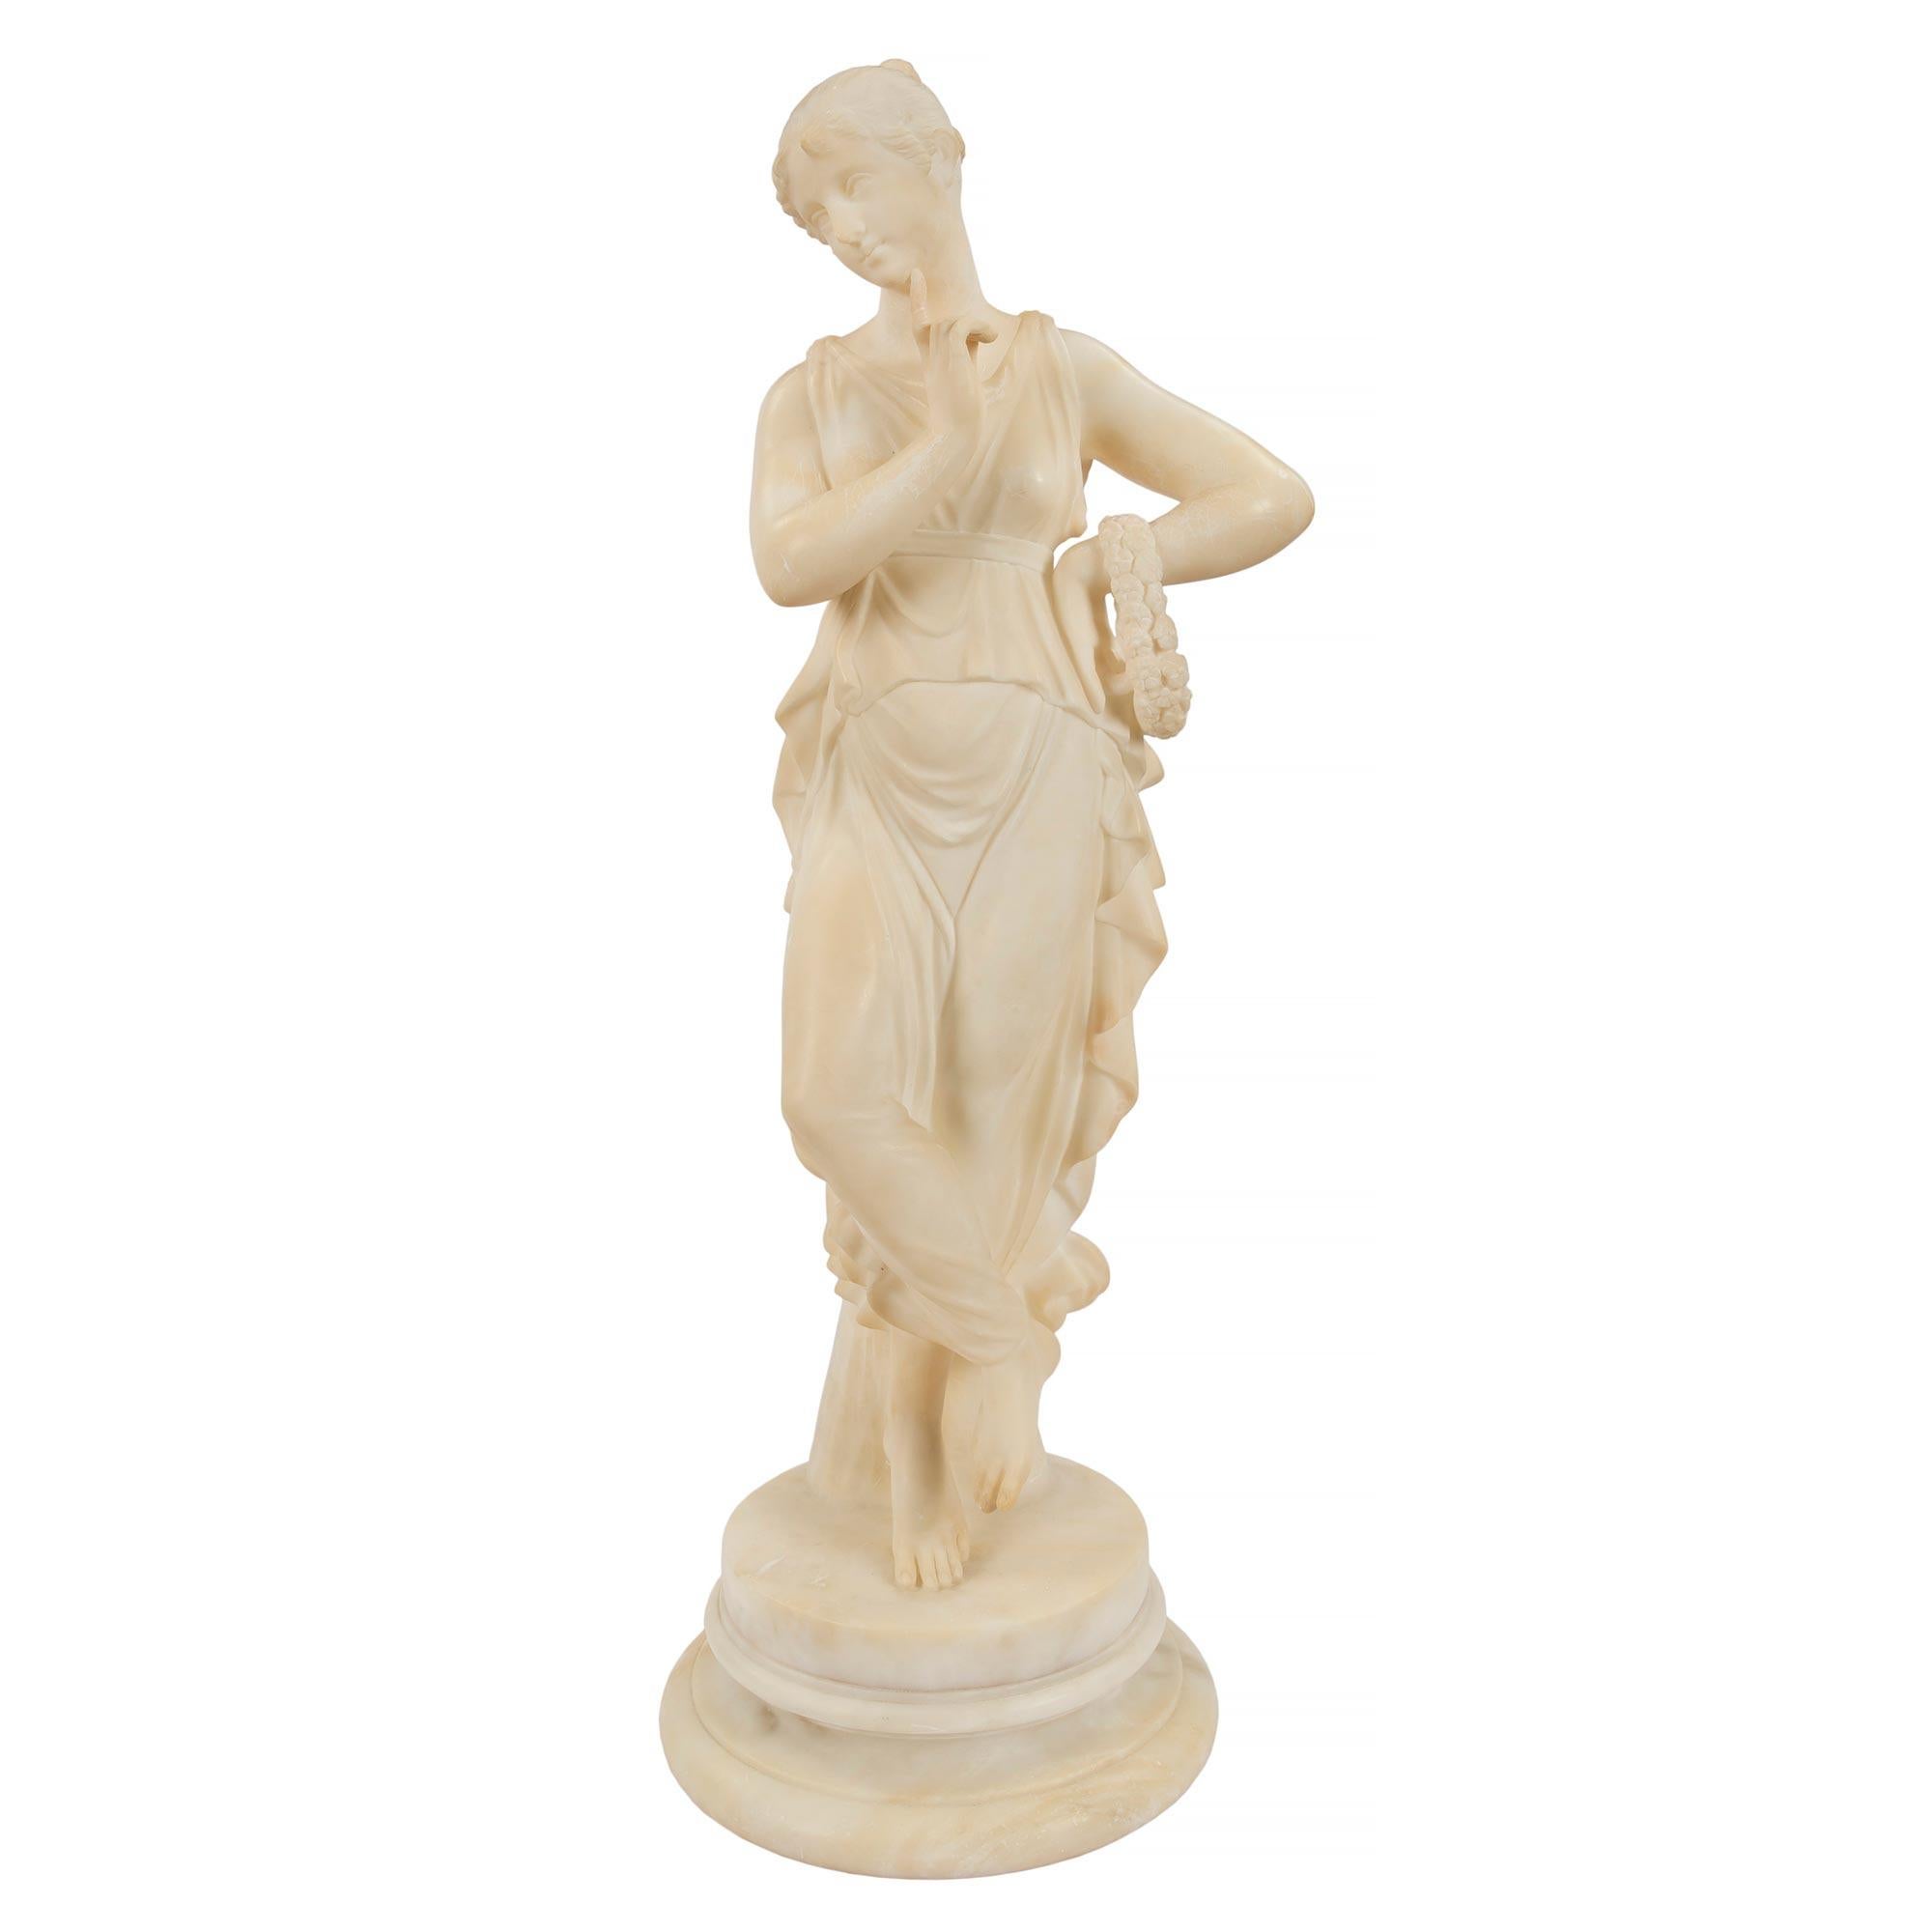 Italian 19th Century Neoclassical Style Alabaster Statue of a Maiden